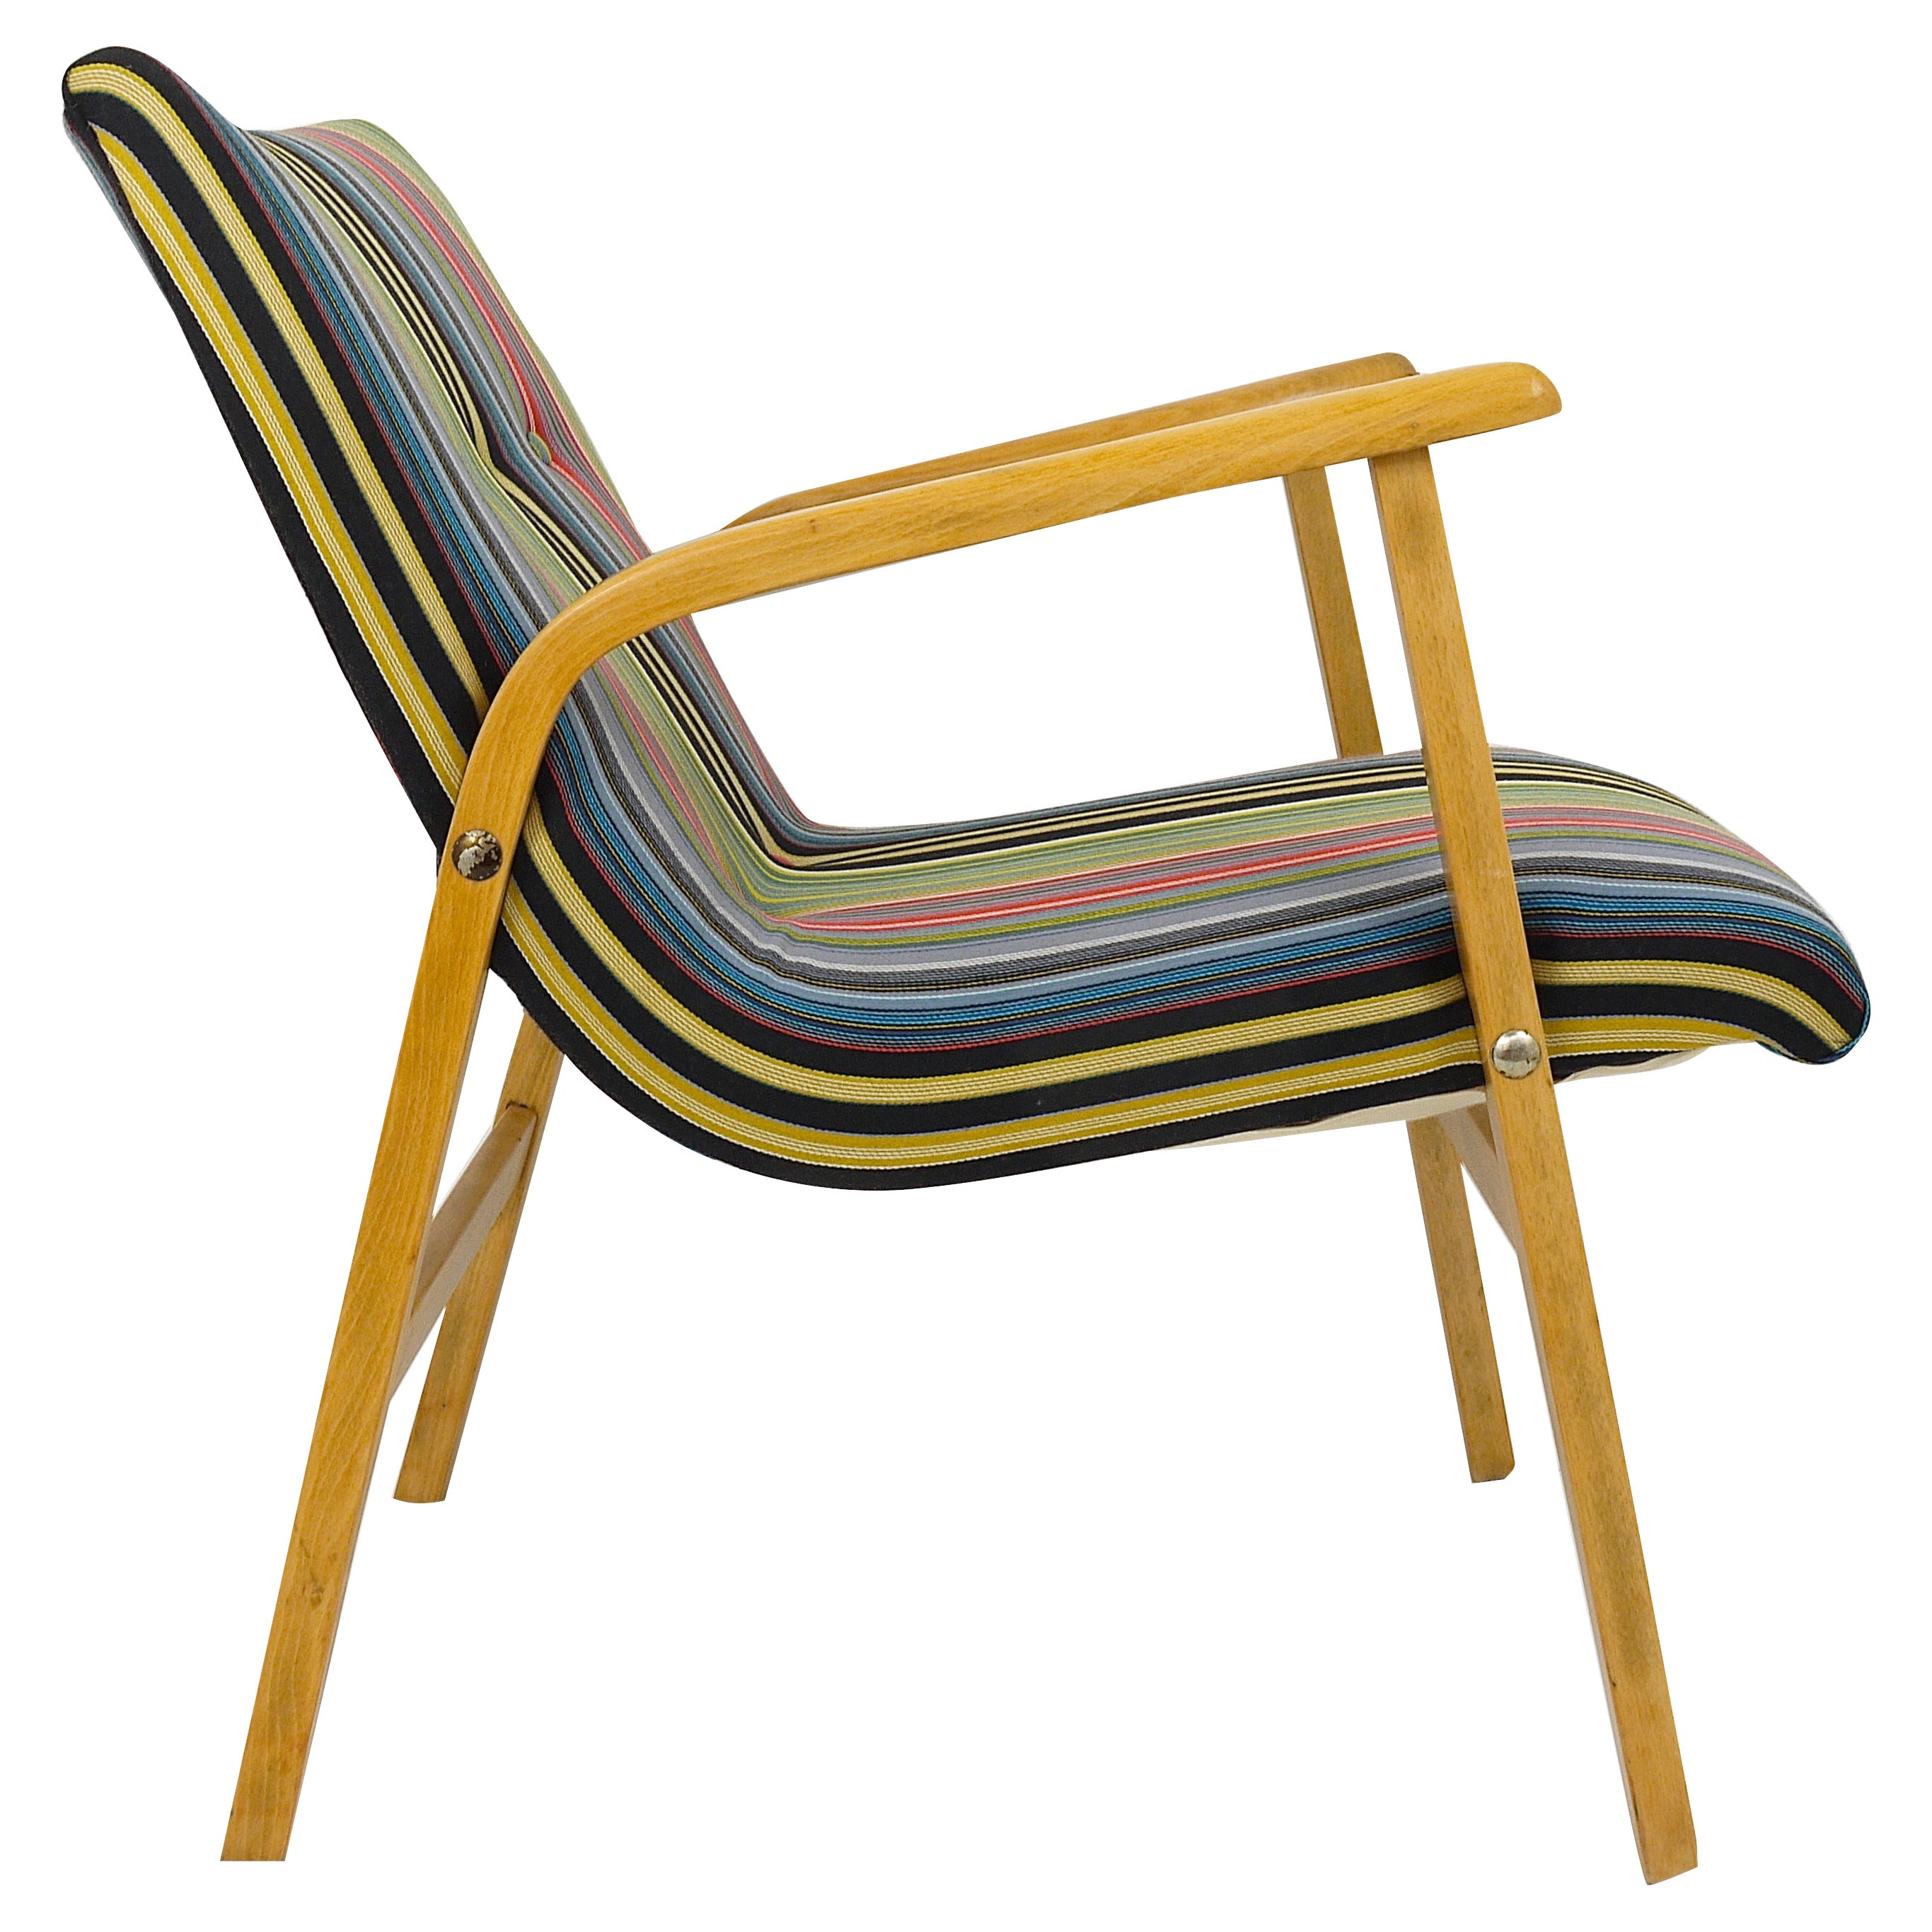 1950s Roland Rainer Cafe Ritter Chair with Paul Smith Maharam Upholstery